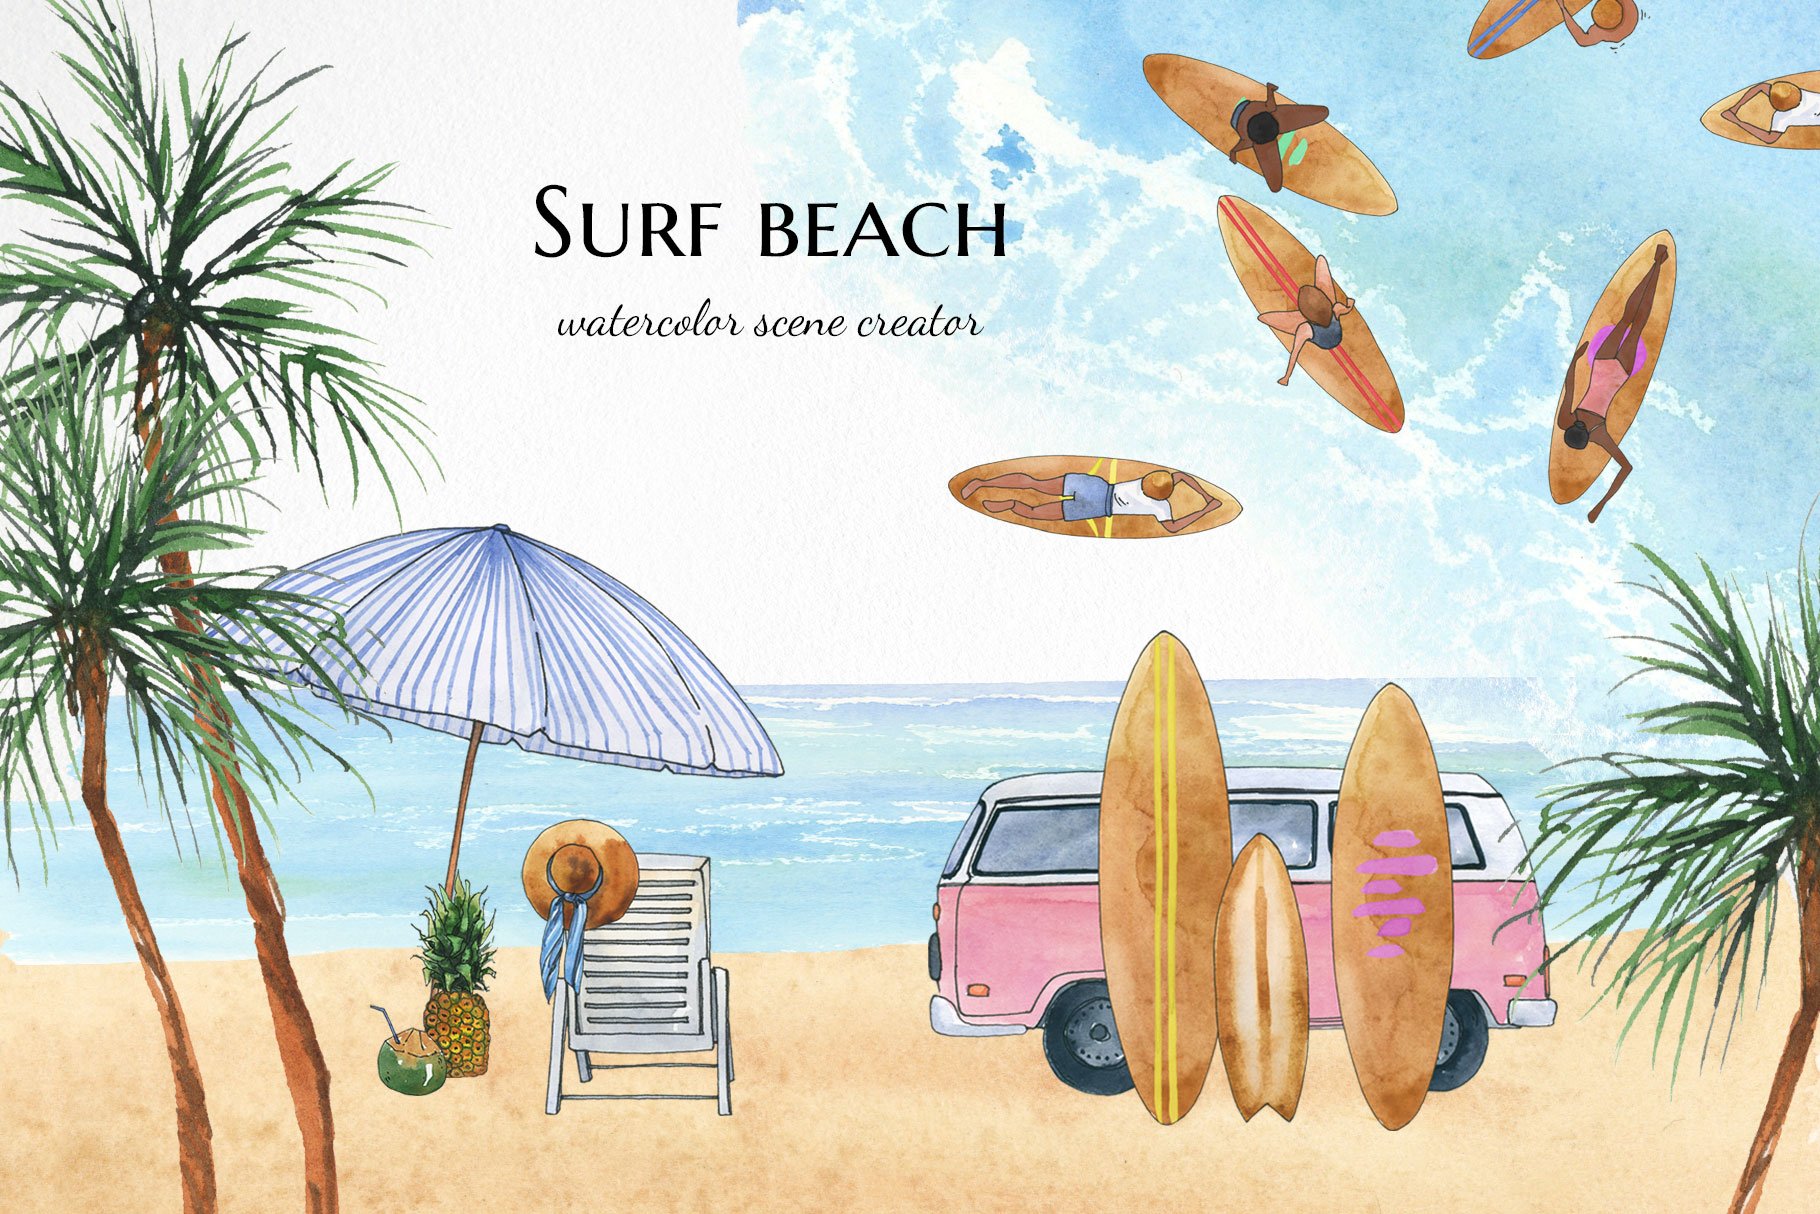 Surfing camp van watercolor clipart cover image.